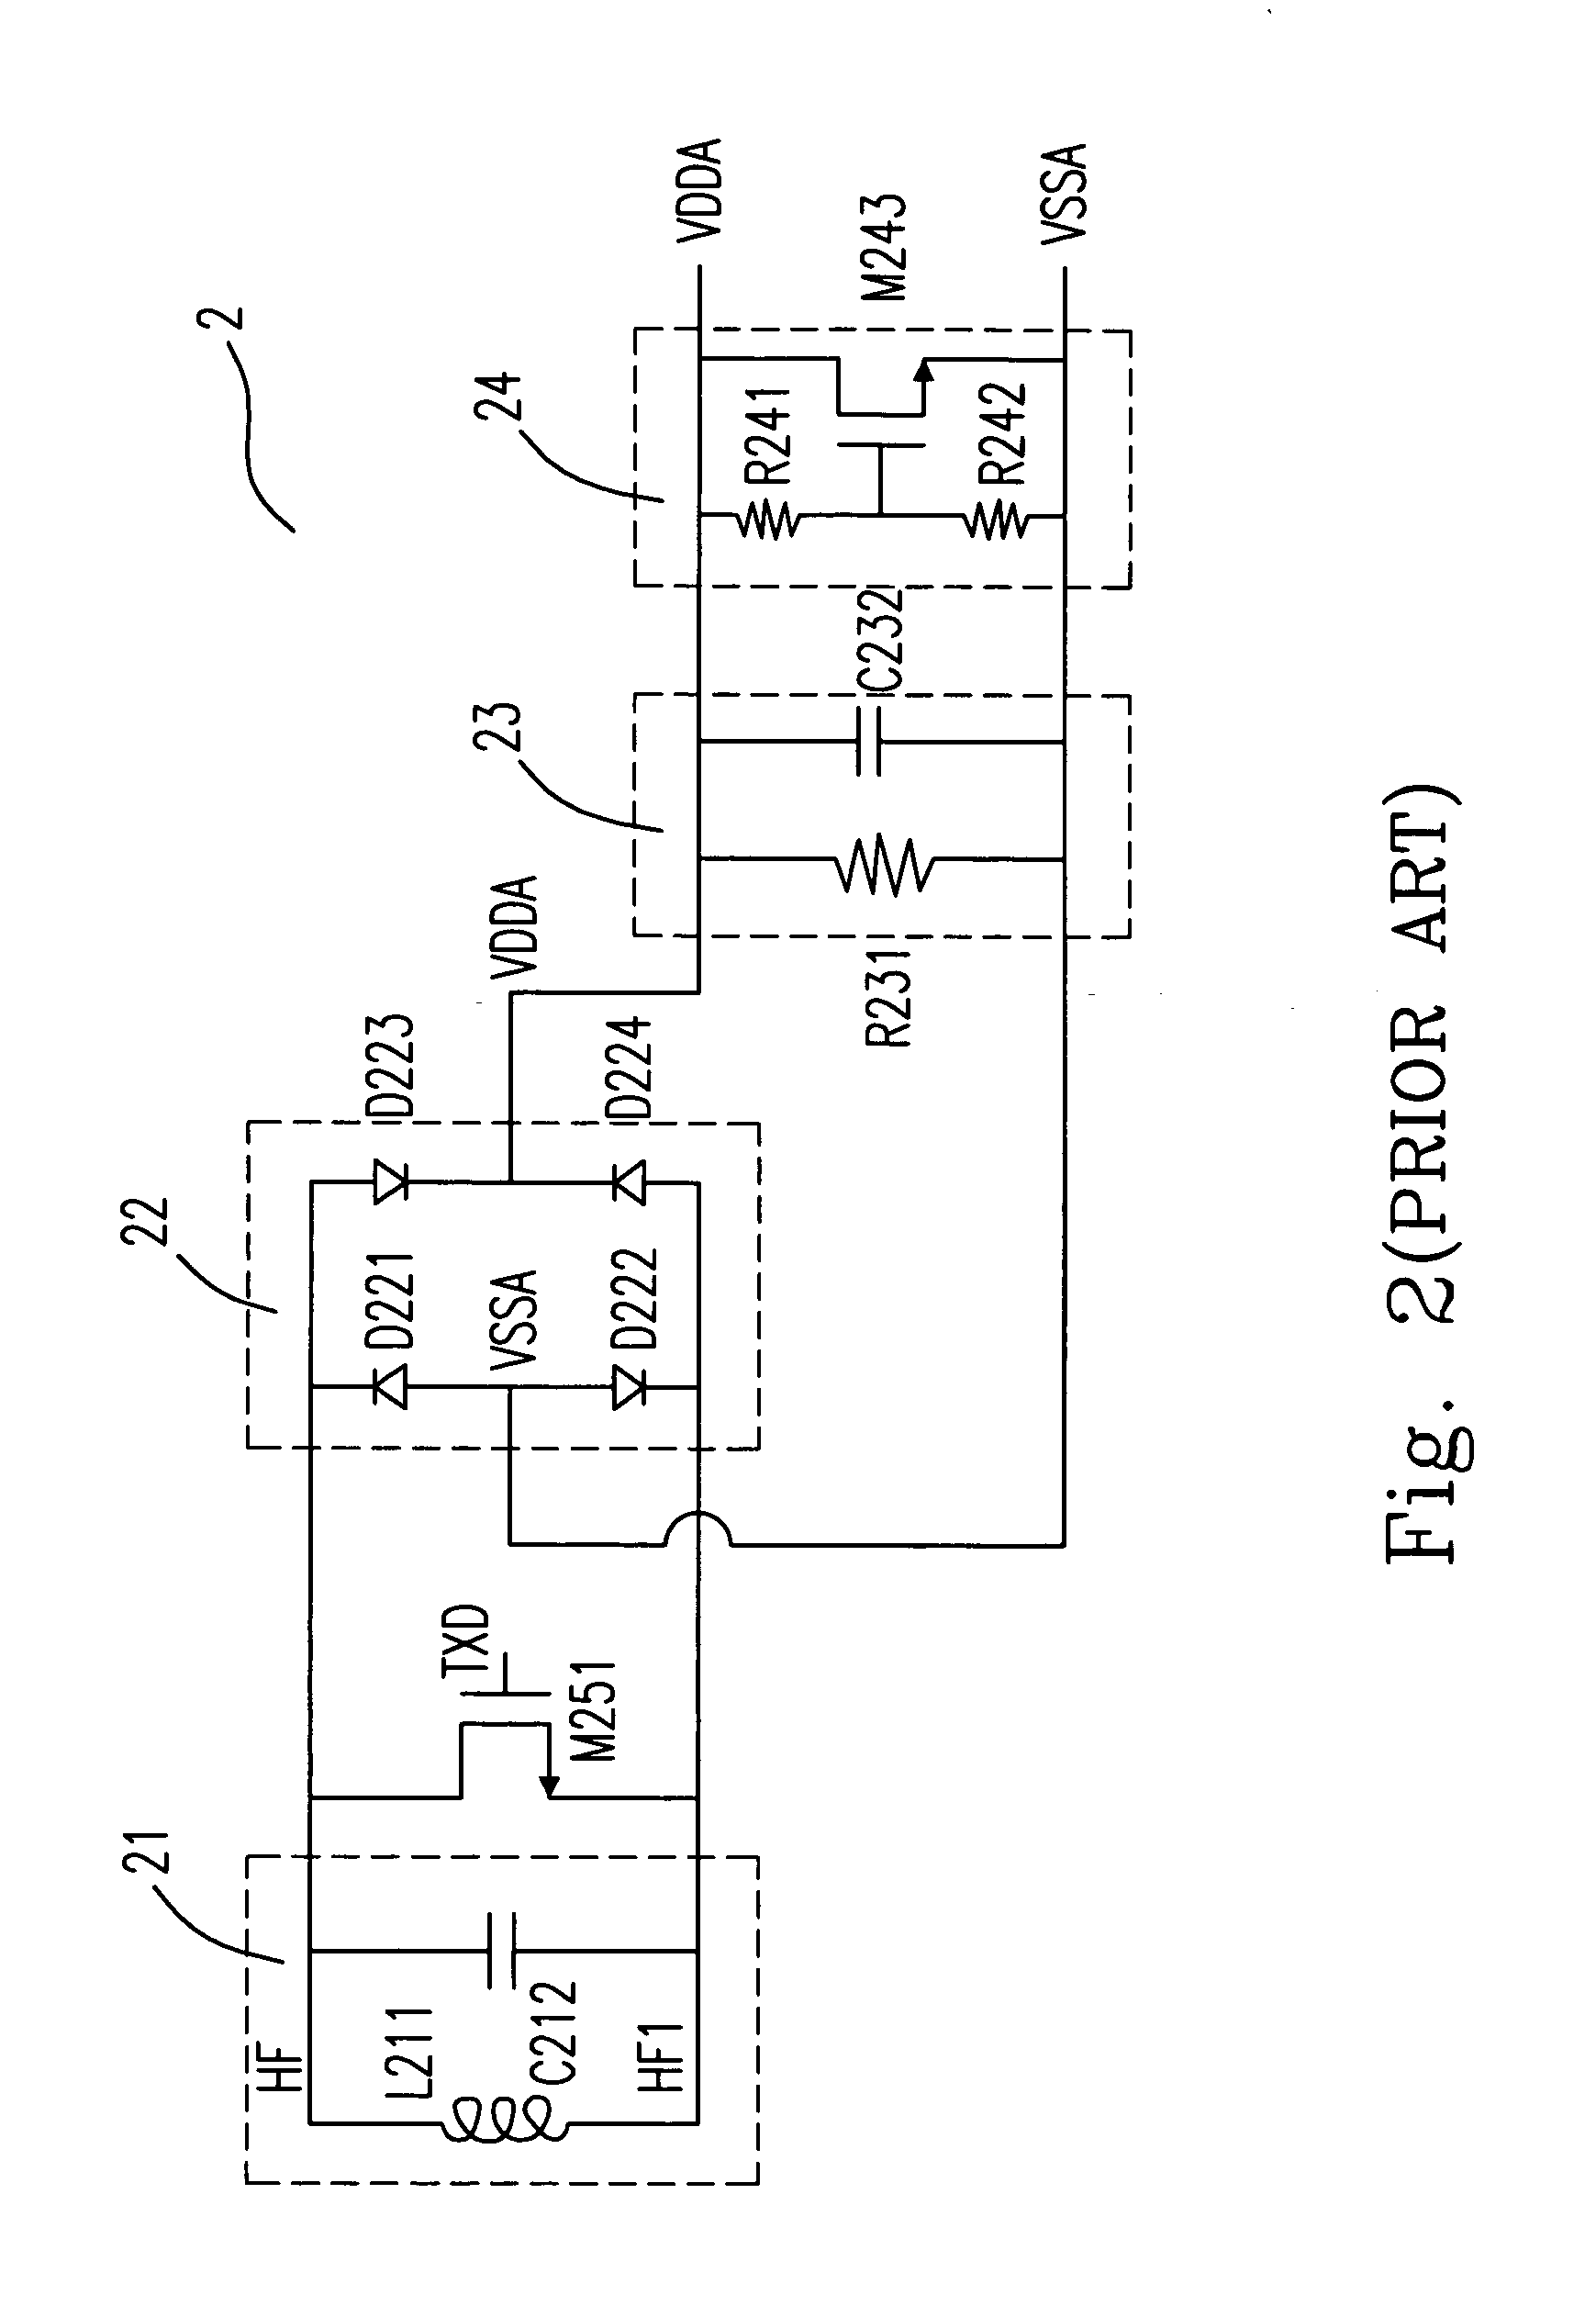 Power processing interface for passive radio frequency identification system